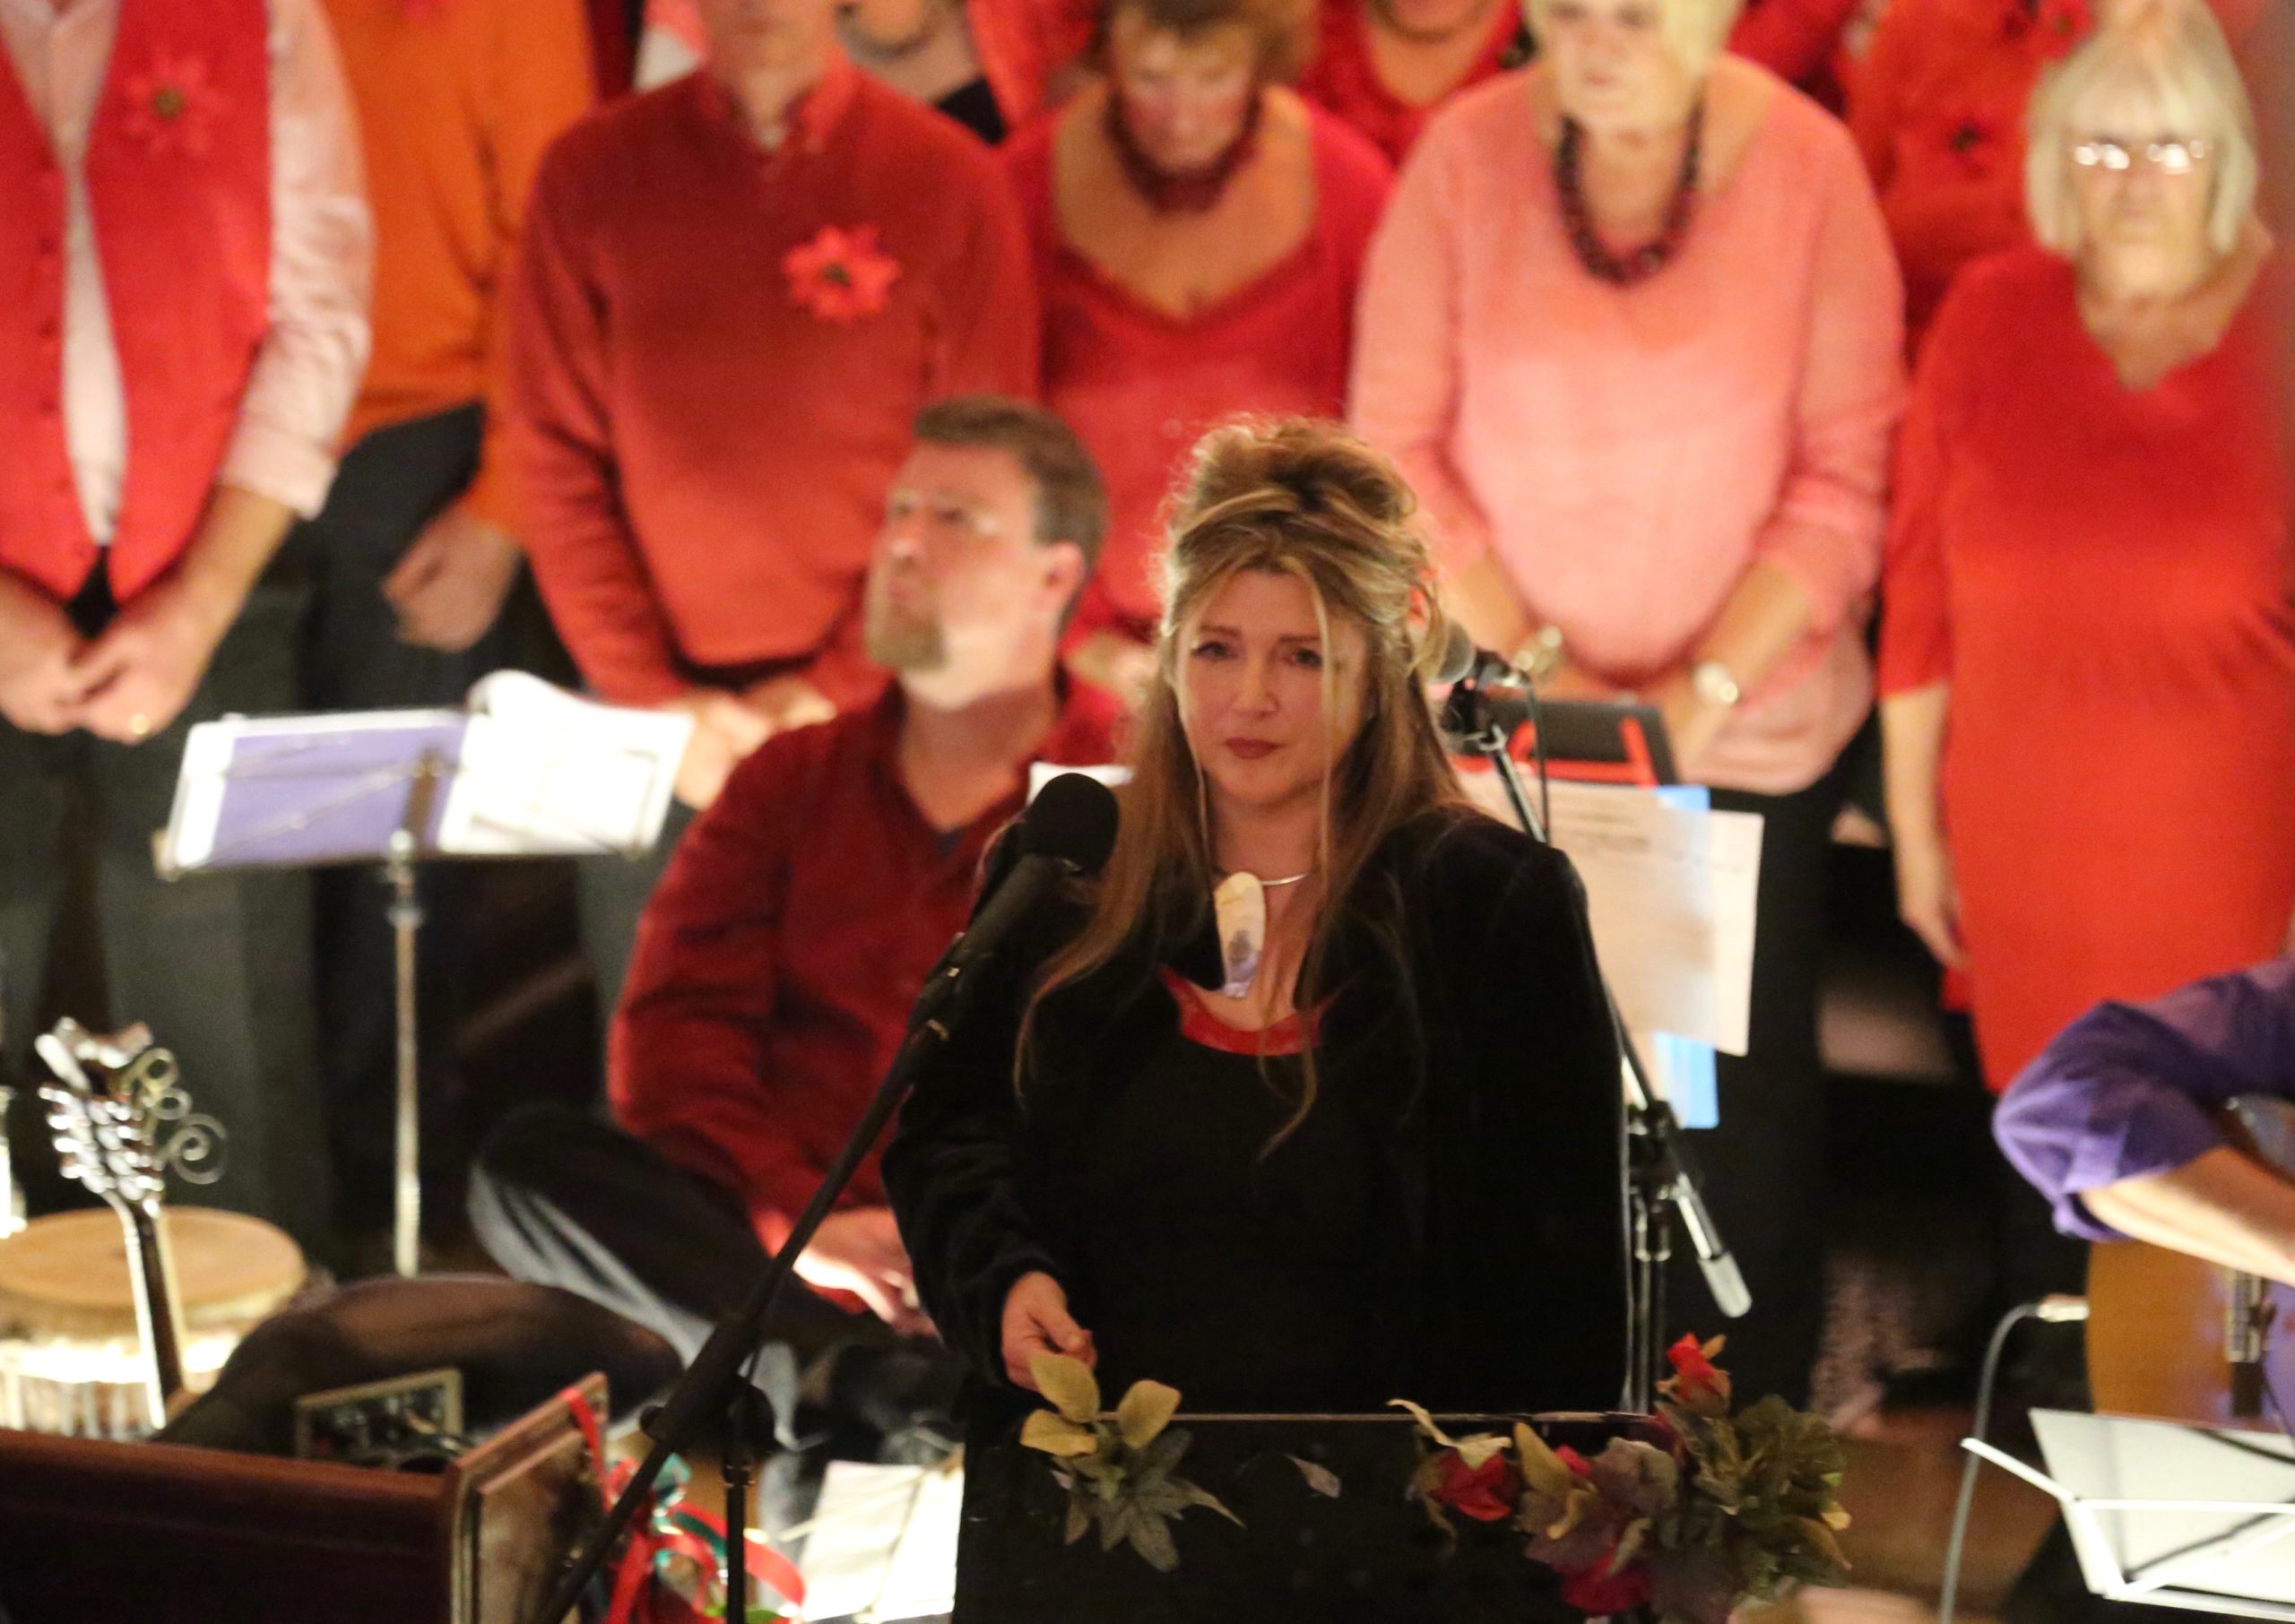 A woman dressed in black stands in front of a choir all dressed in red tones.